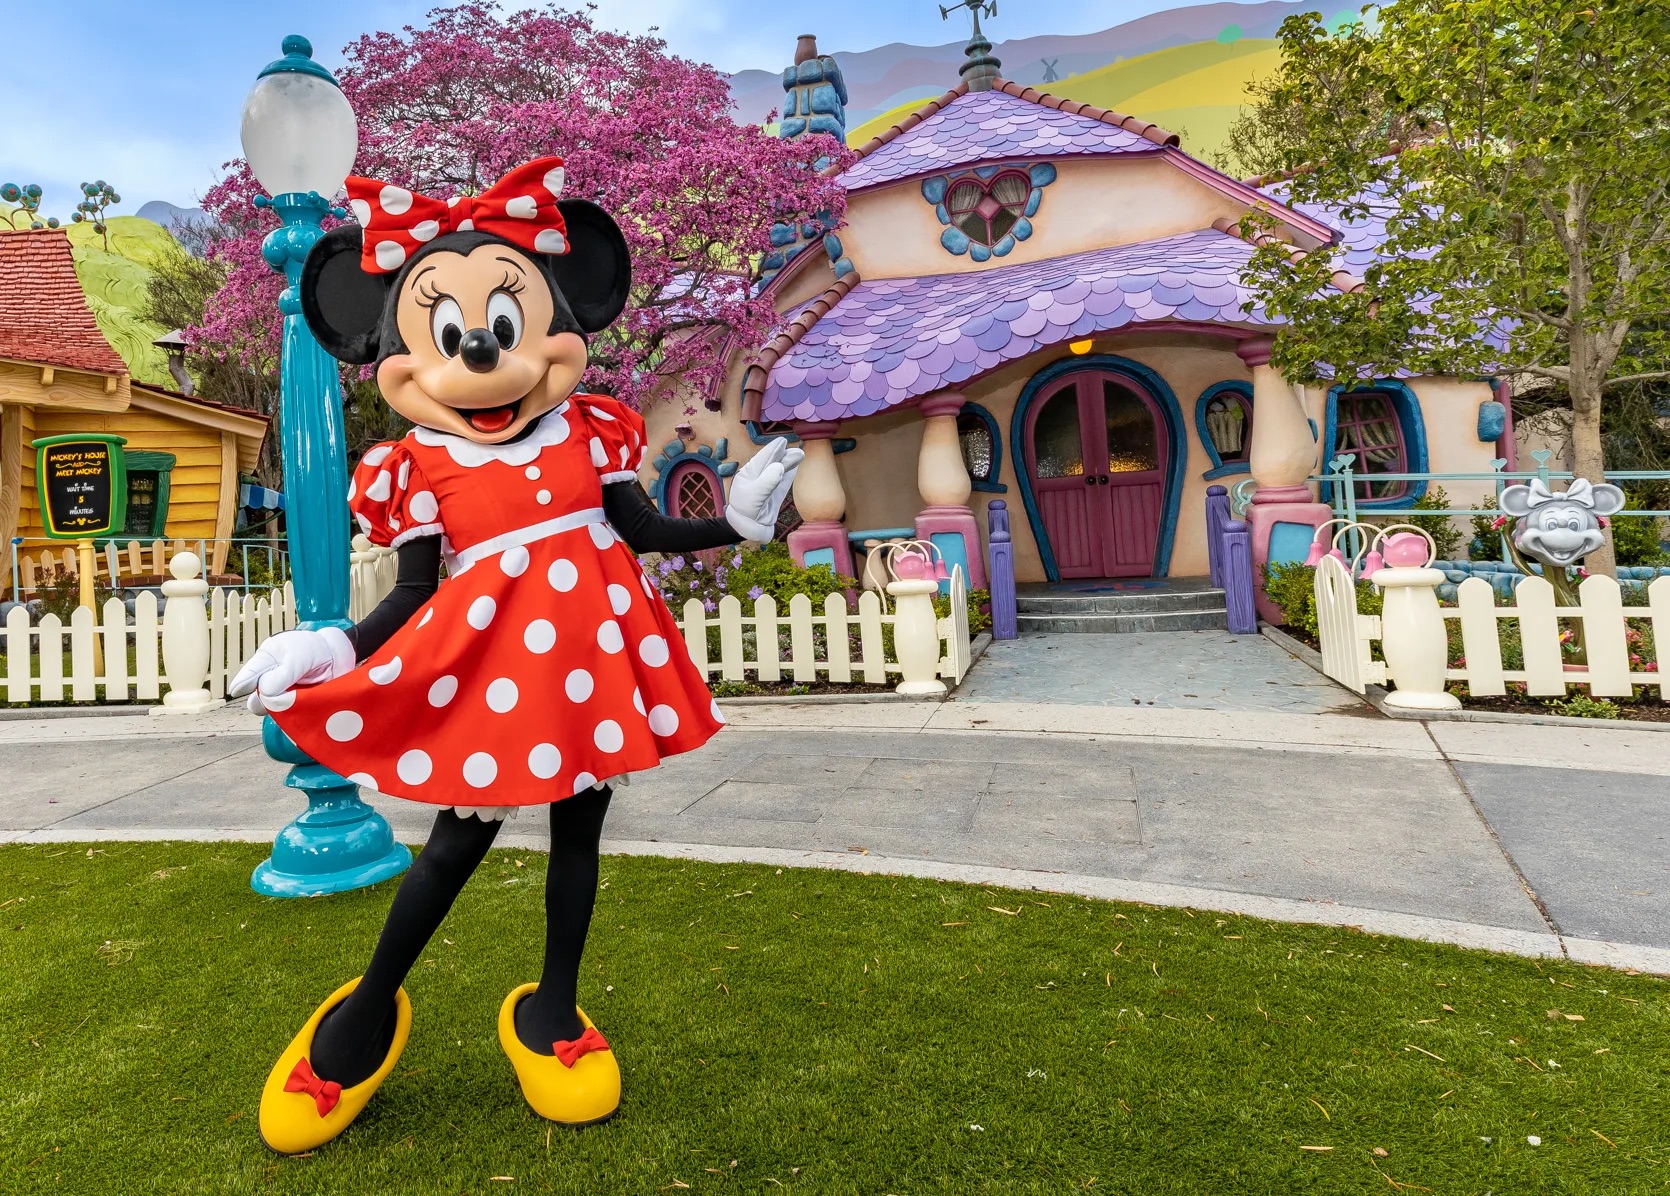 Minnie Mouse Returns to Mickey’s Toontown at Disneyland Park